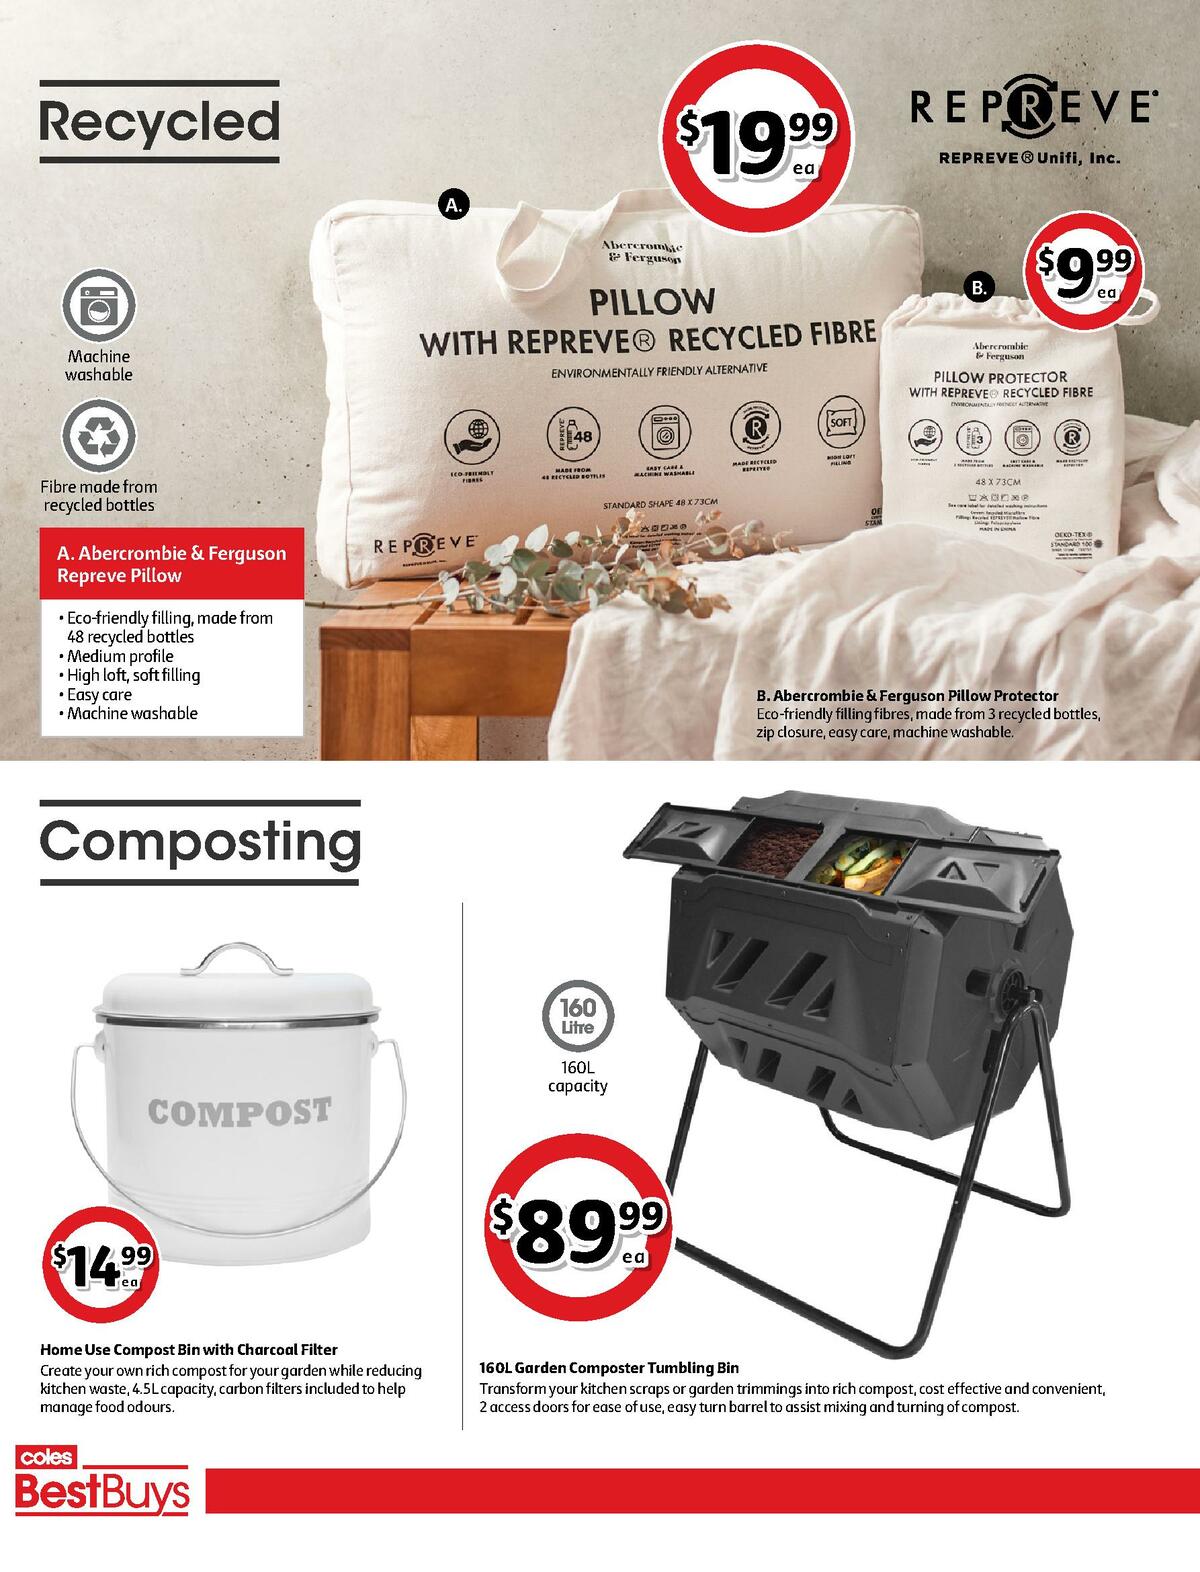 Coles Best Buys - Conscious Living Catalogues from 8 October